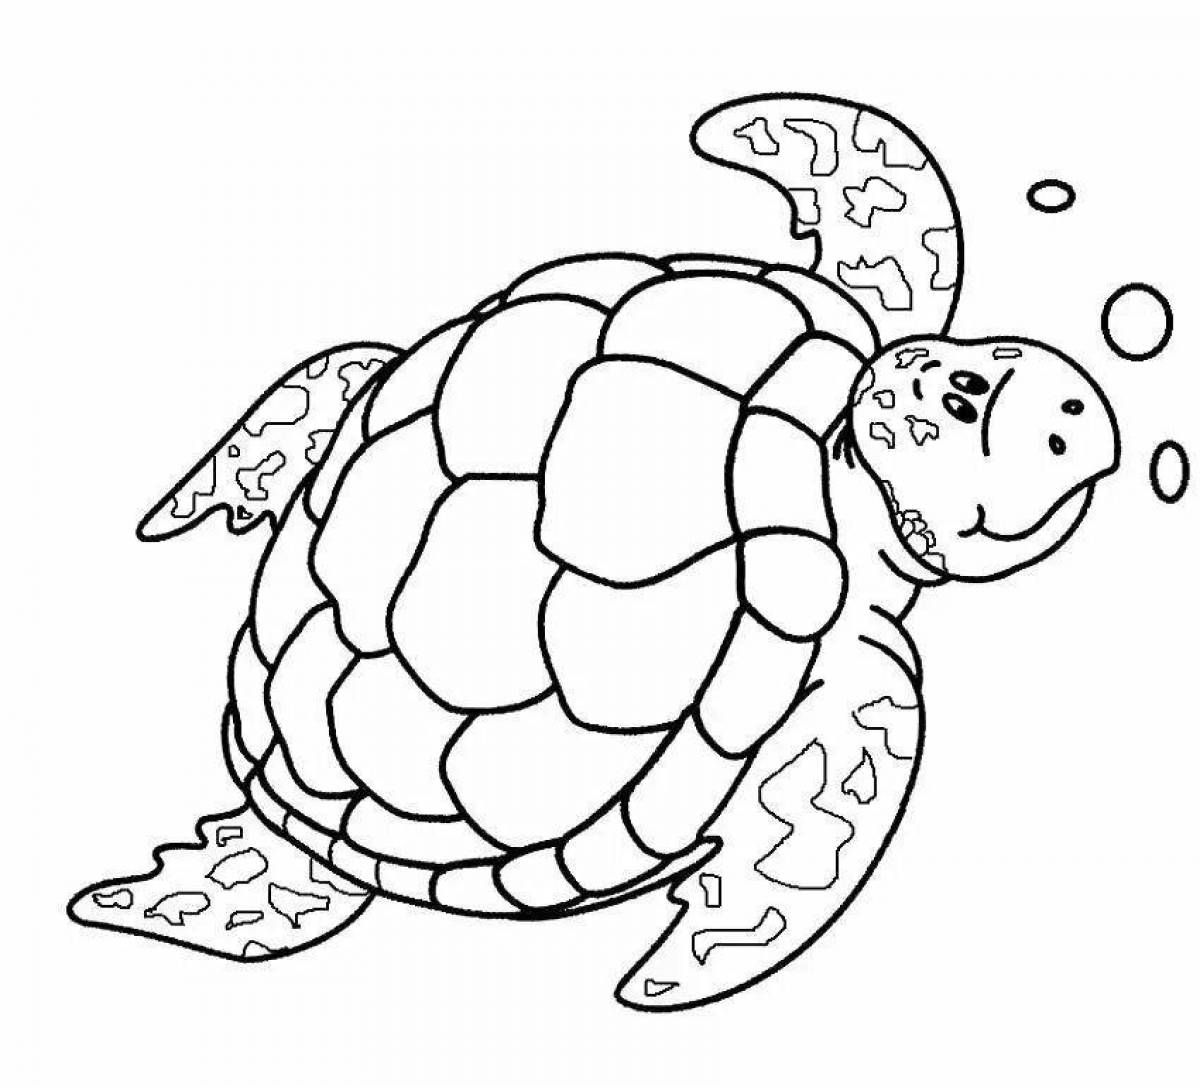 Glitter turtle coloring page